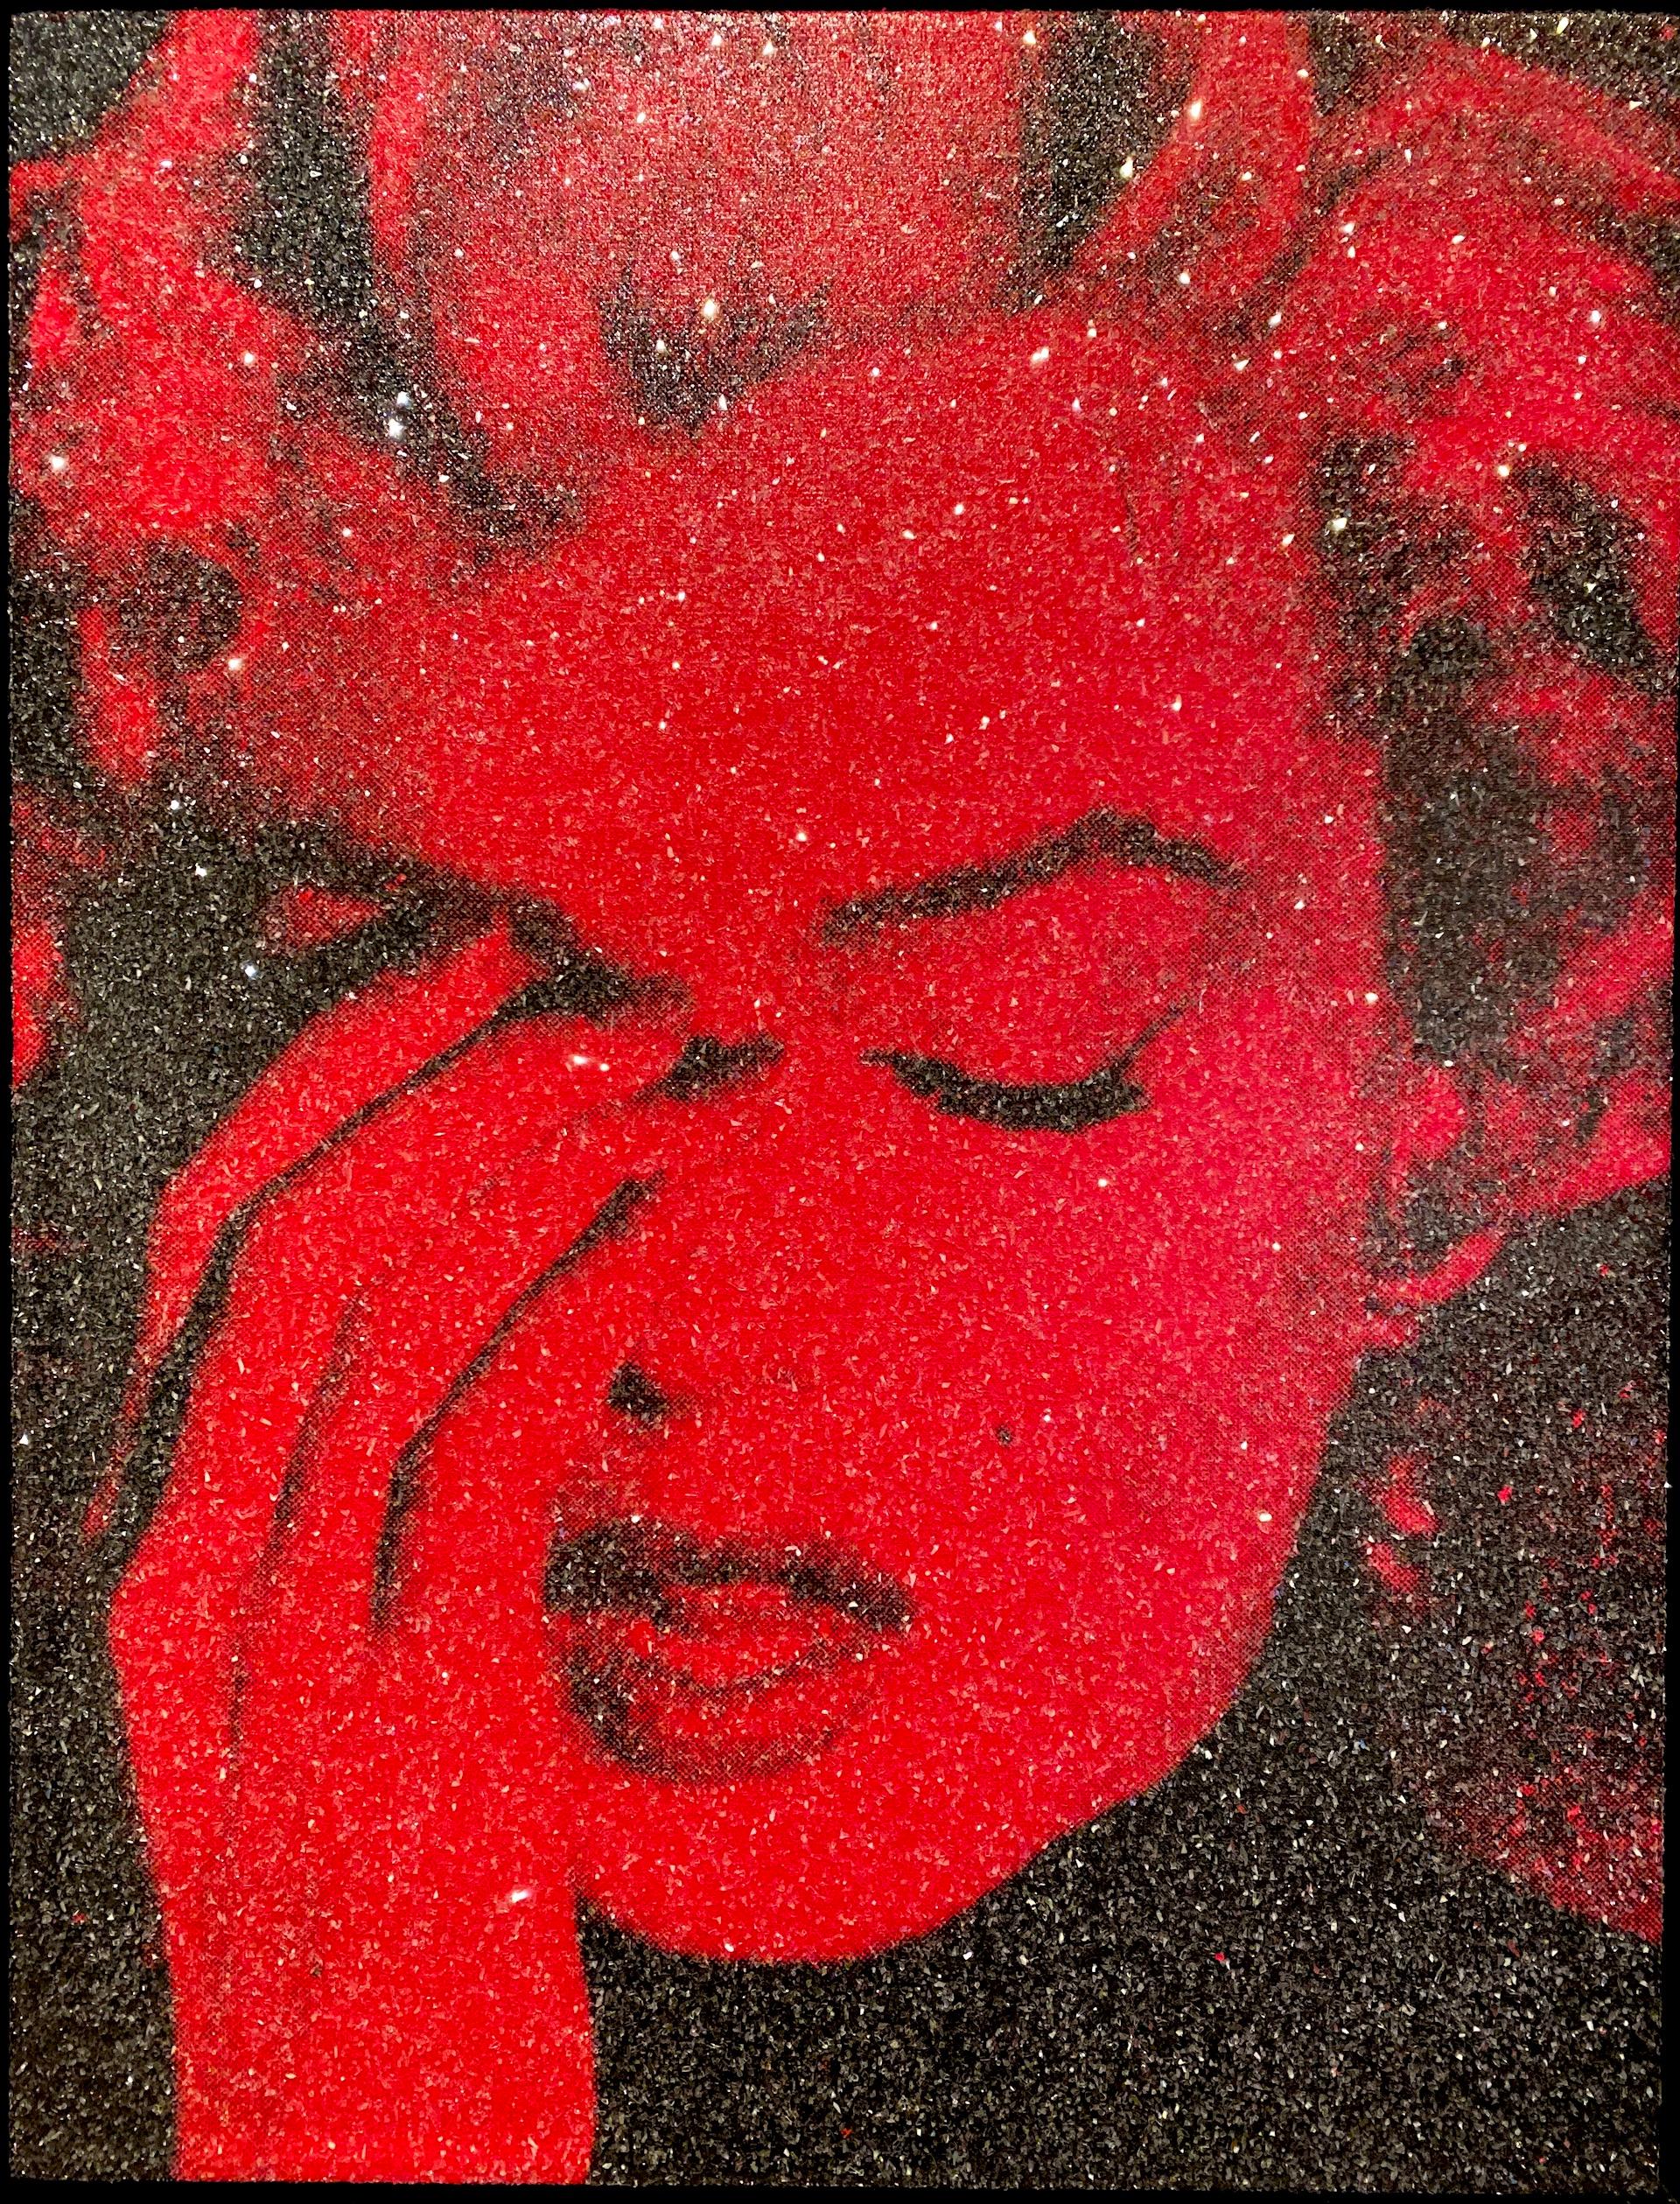 Russell Young Portrait Print - Marilyn Crying - Fire Red